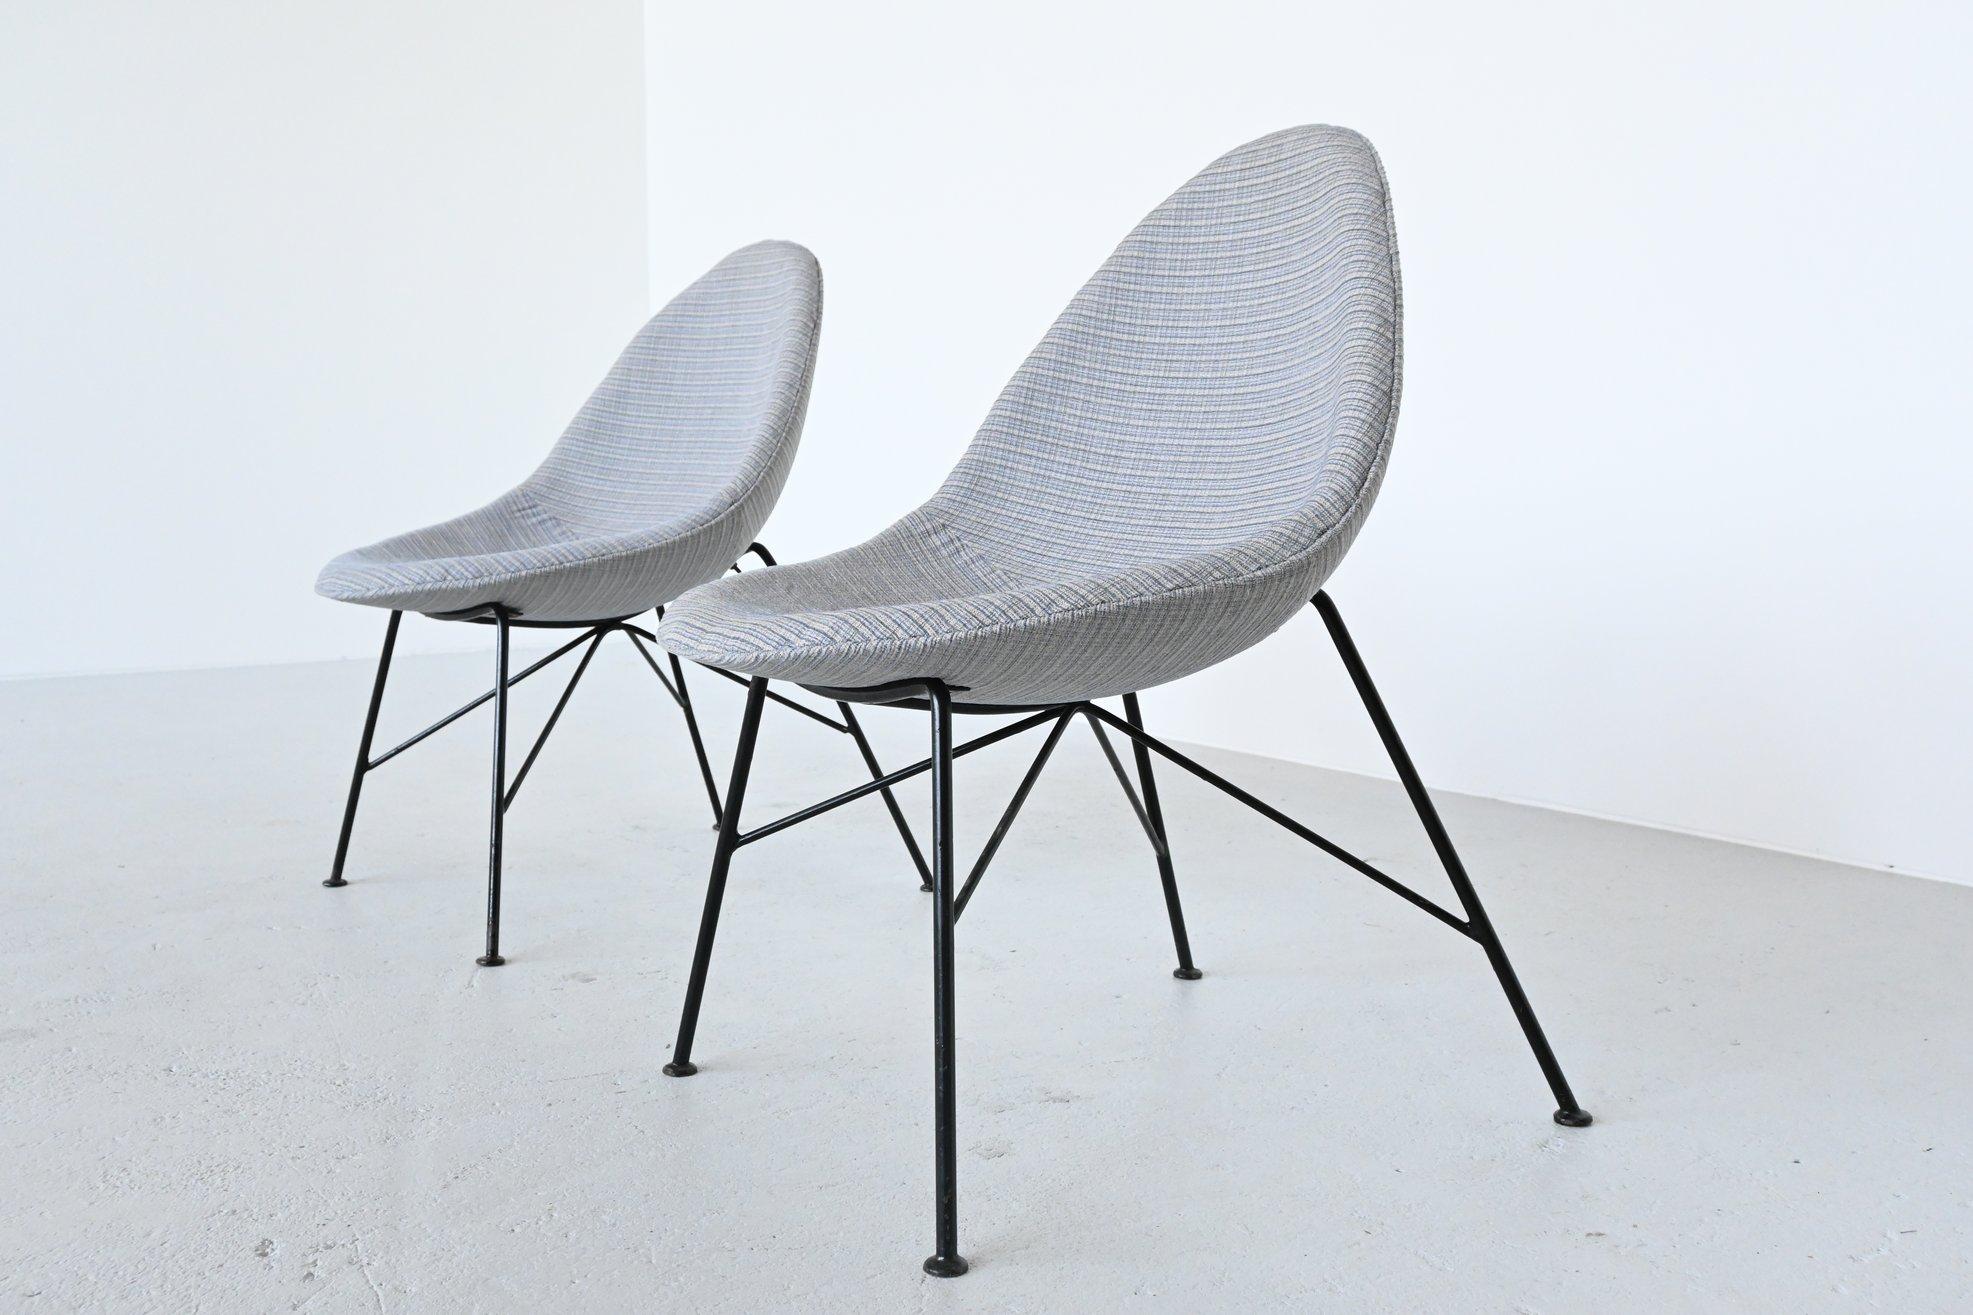 Very nice and rare set of egg fireside chairs designed by Miroslav Navratil, Czech Republic, 1950. These chairs has very nice black lacquered metal wire frames and egg shaped seats like the shell chairs from Charles and Ray Eames, but these are